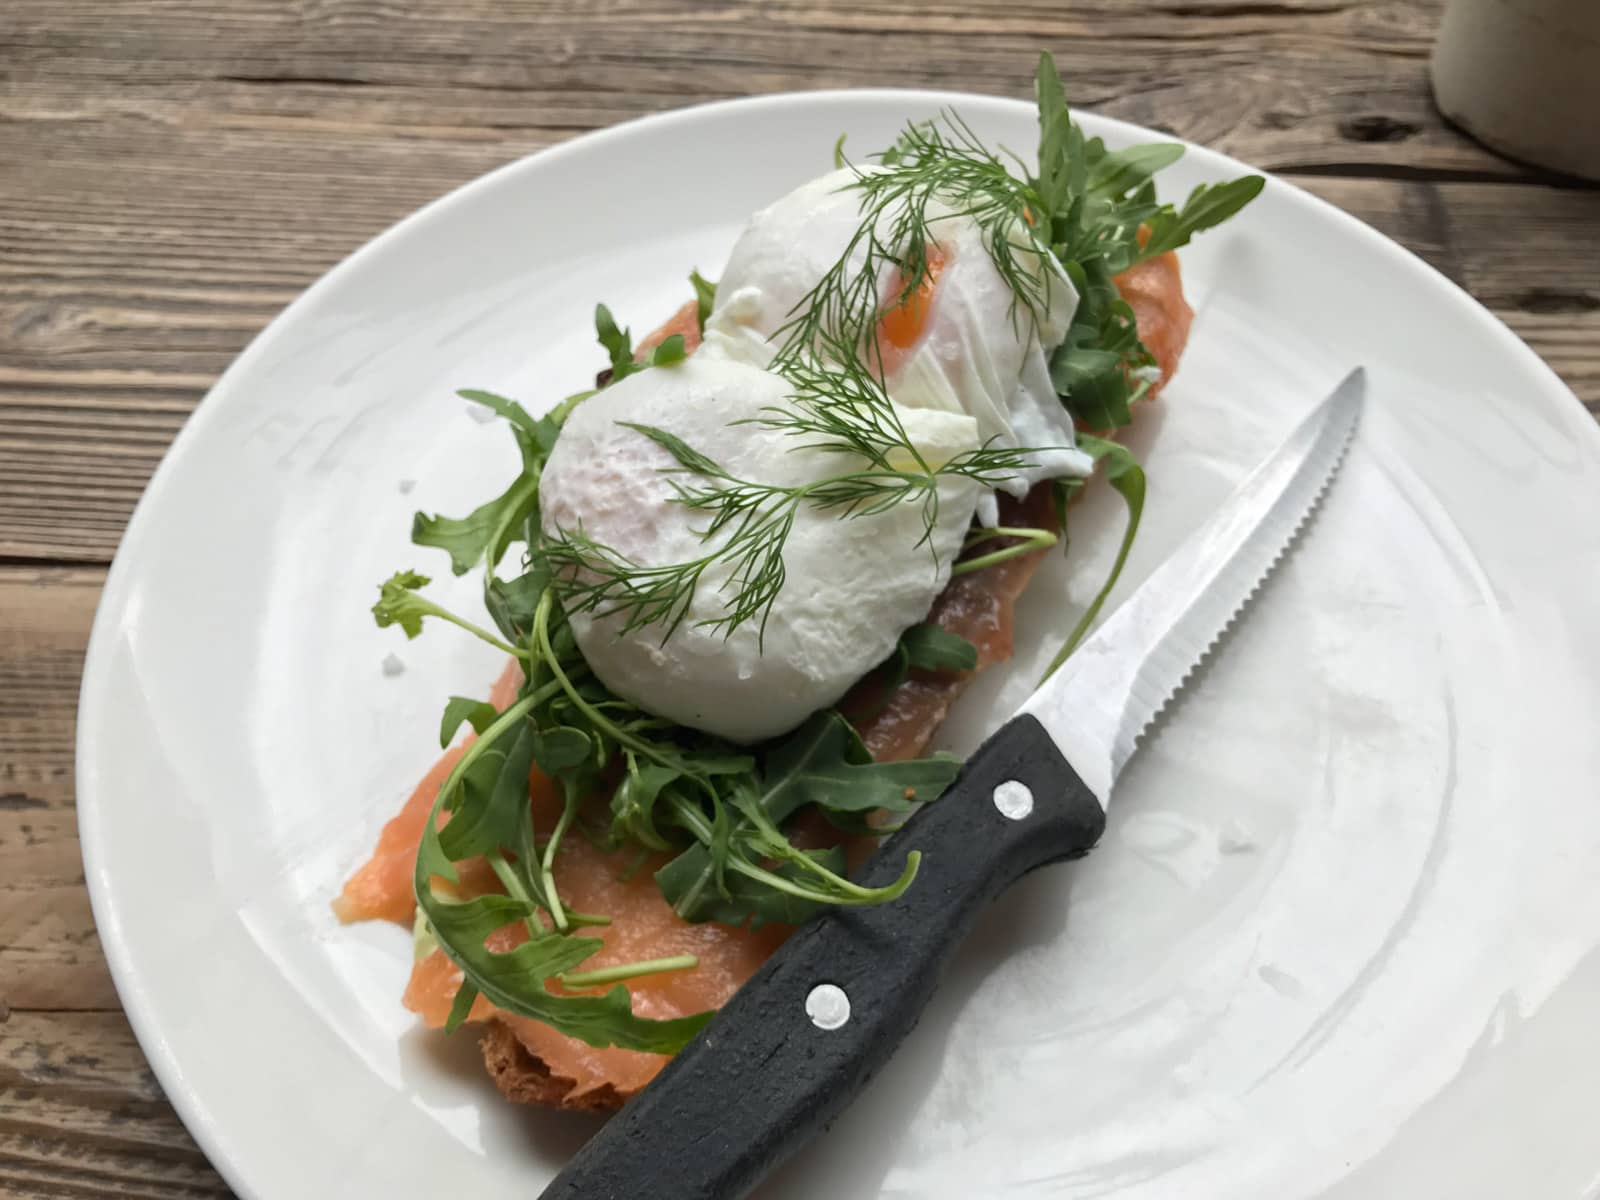 A white plate with smoked salmon and poached eggs on toast, with a serrated knife next to the food